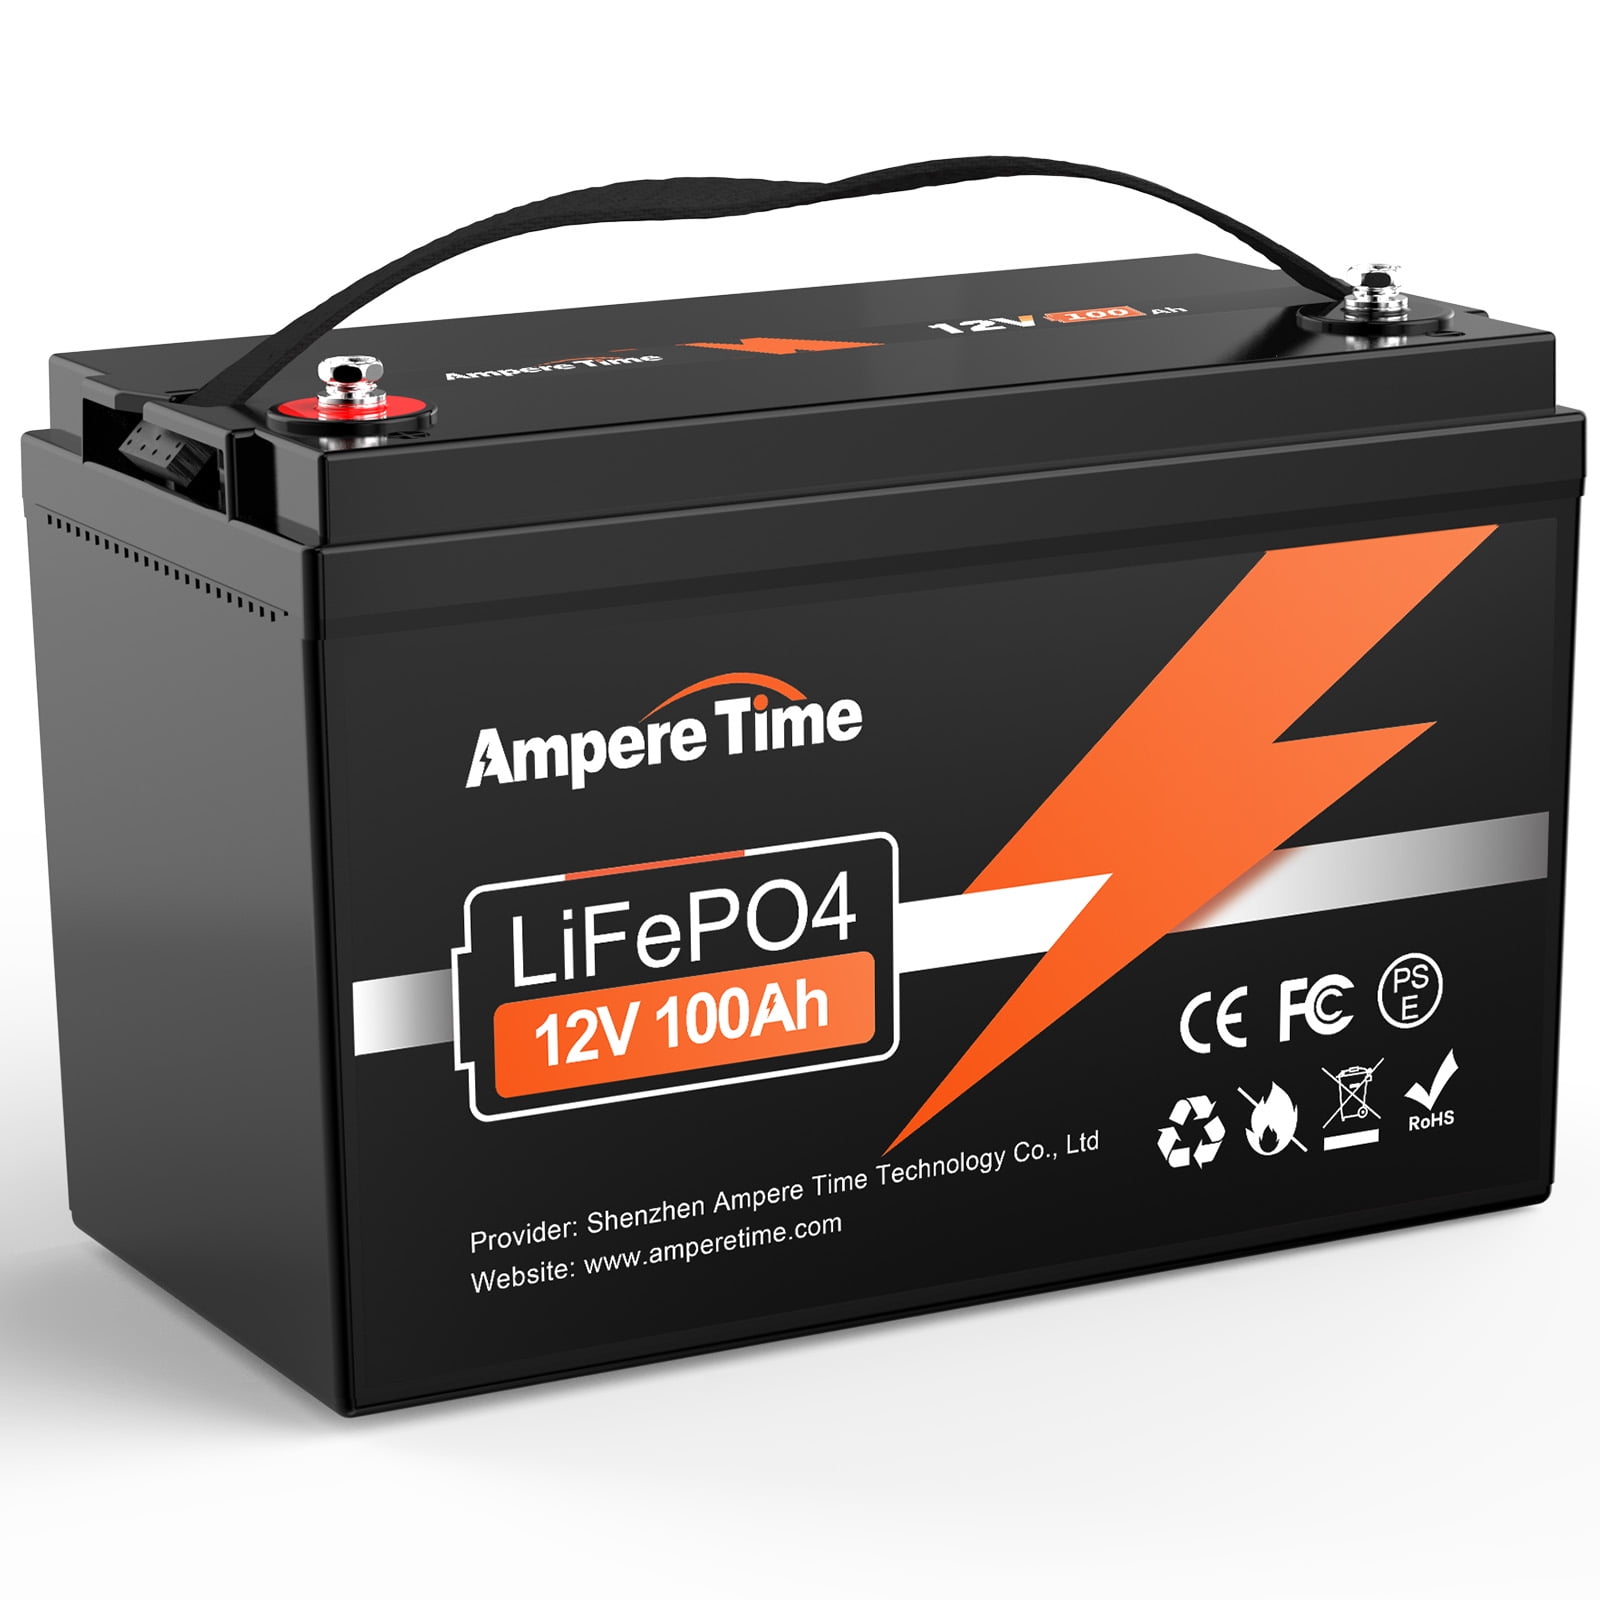 Ampere Time LiFePO4 Deep Cycle Iron Battery 12V 100Ah Boat Fishing